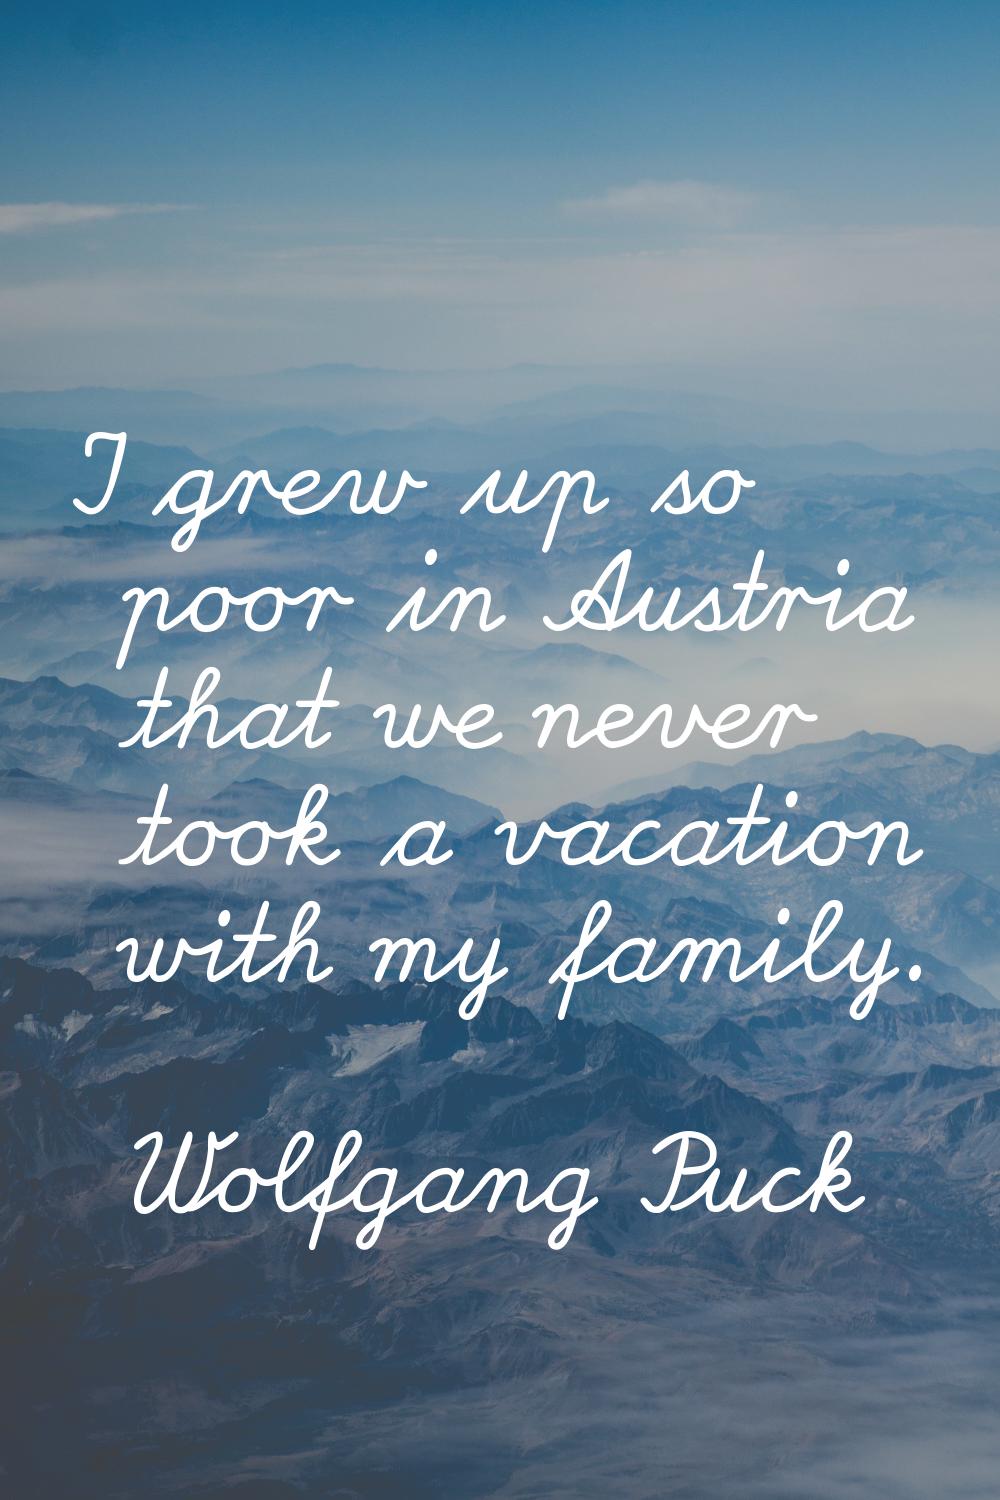 I grew up so poor in Austria that we never took a vacation with my family.